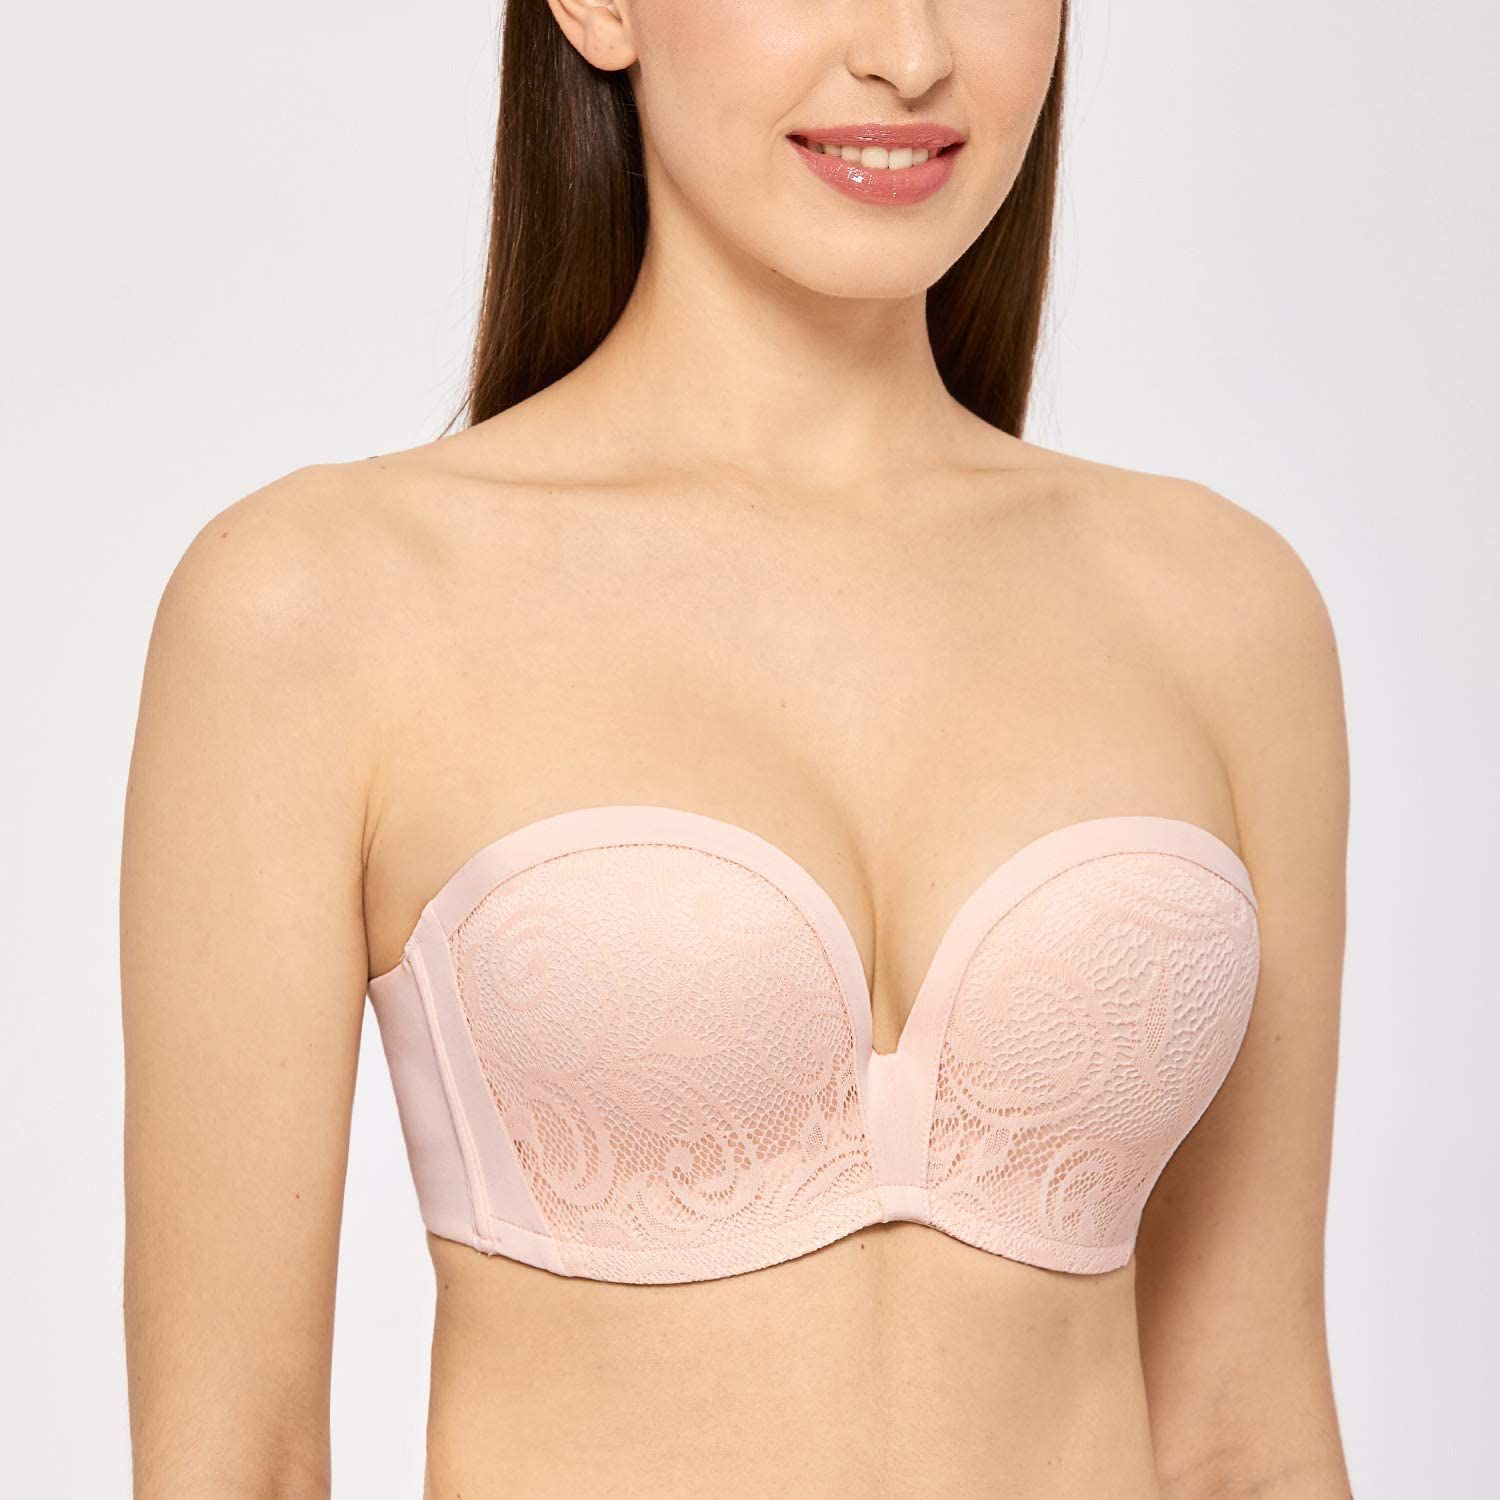 10 Best Strapless Bras Of 2020 ReviewThis